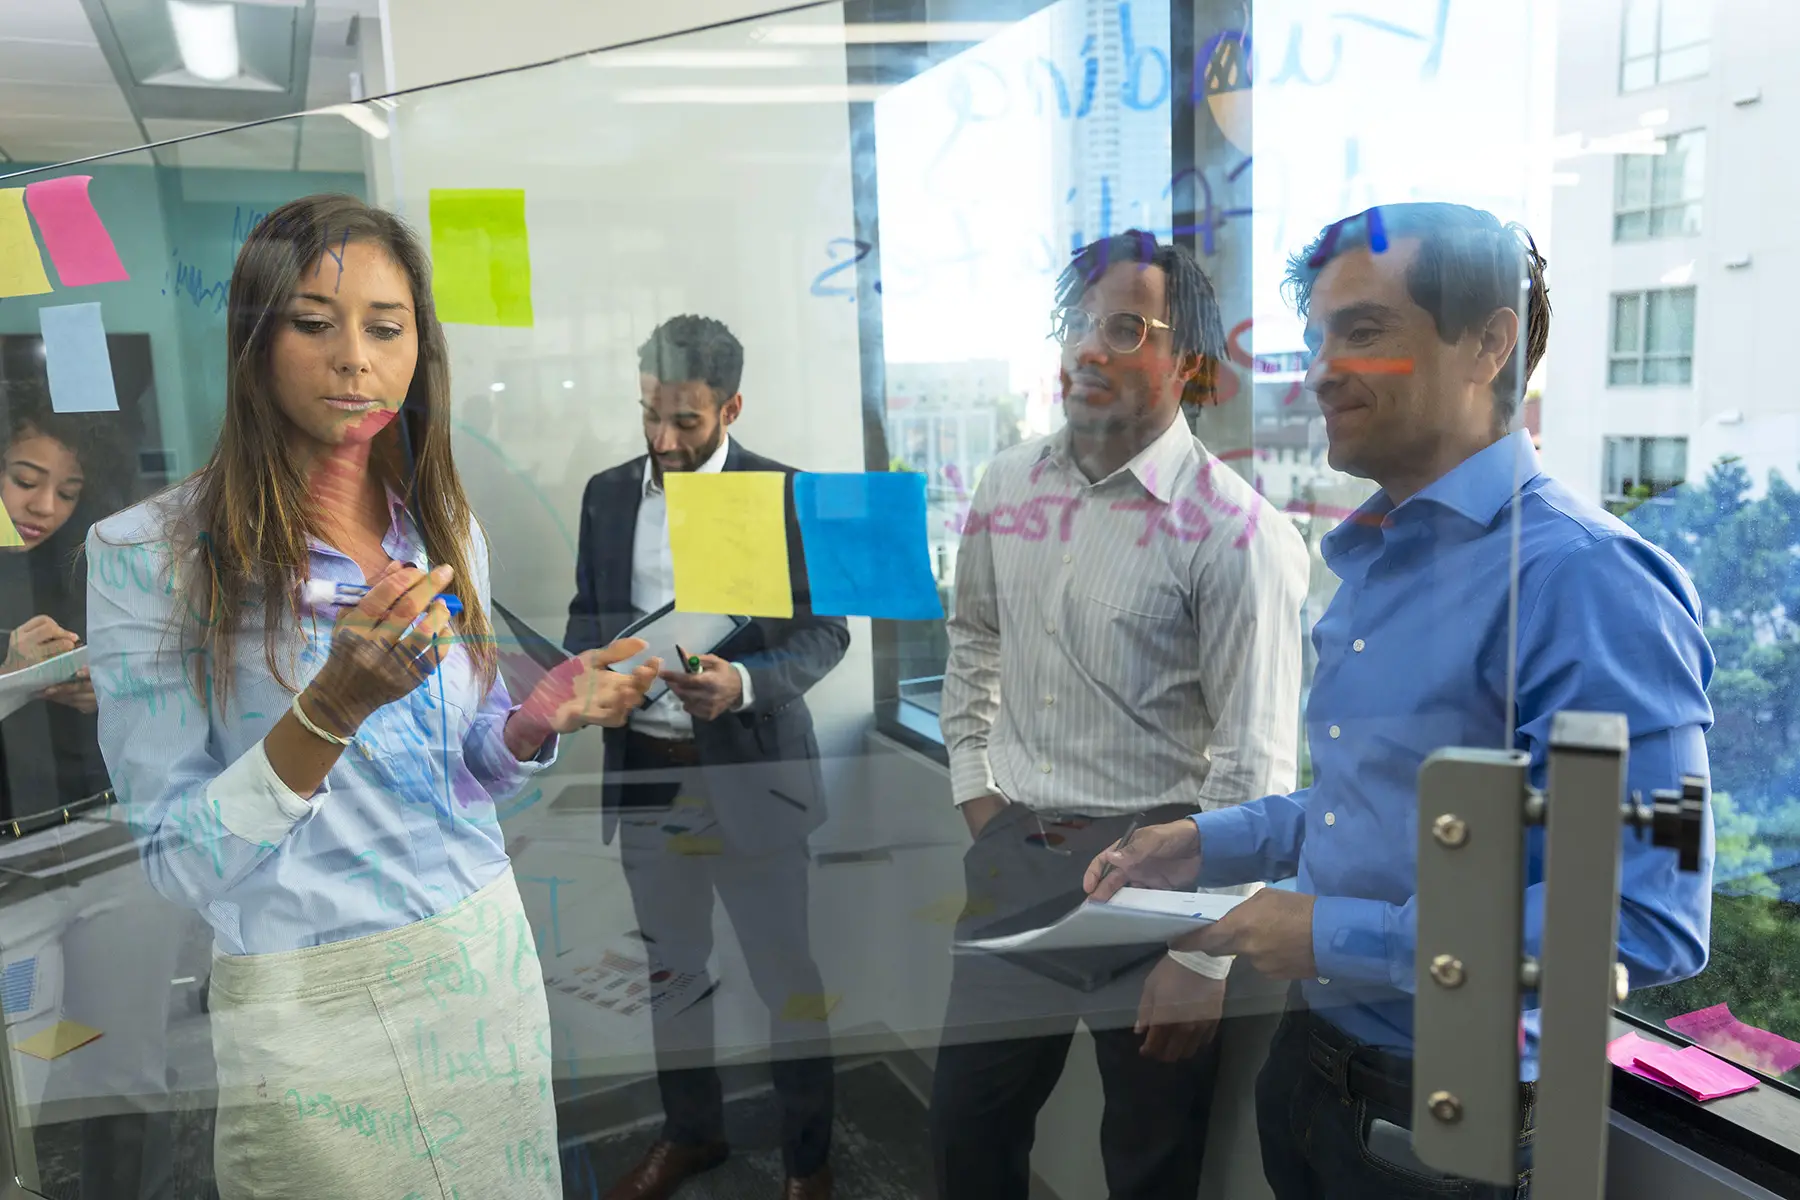 Business meeting - three men and a woman standing in office looking at writing on a window, due to the gender pay gap in South Africa, women often get lower wages than men for doing the same job